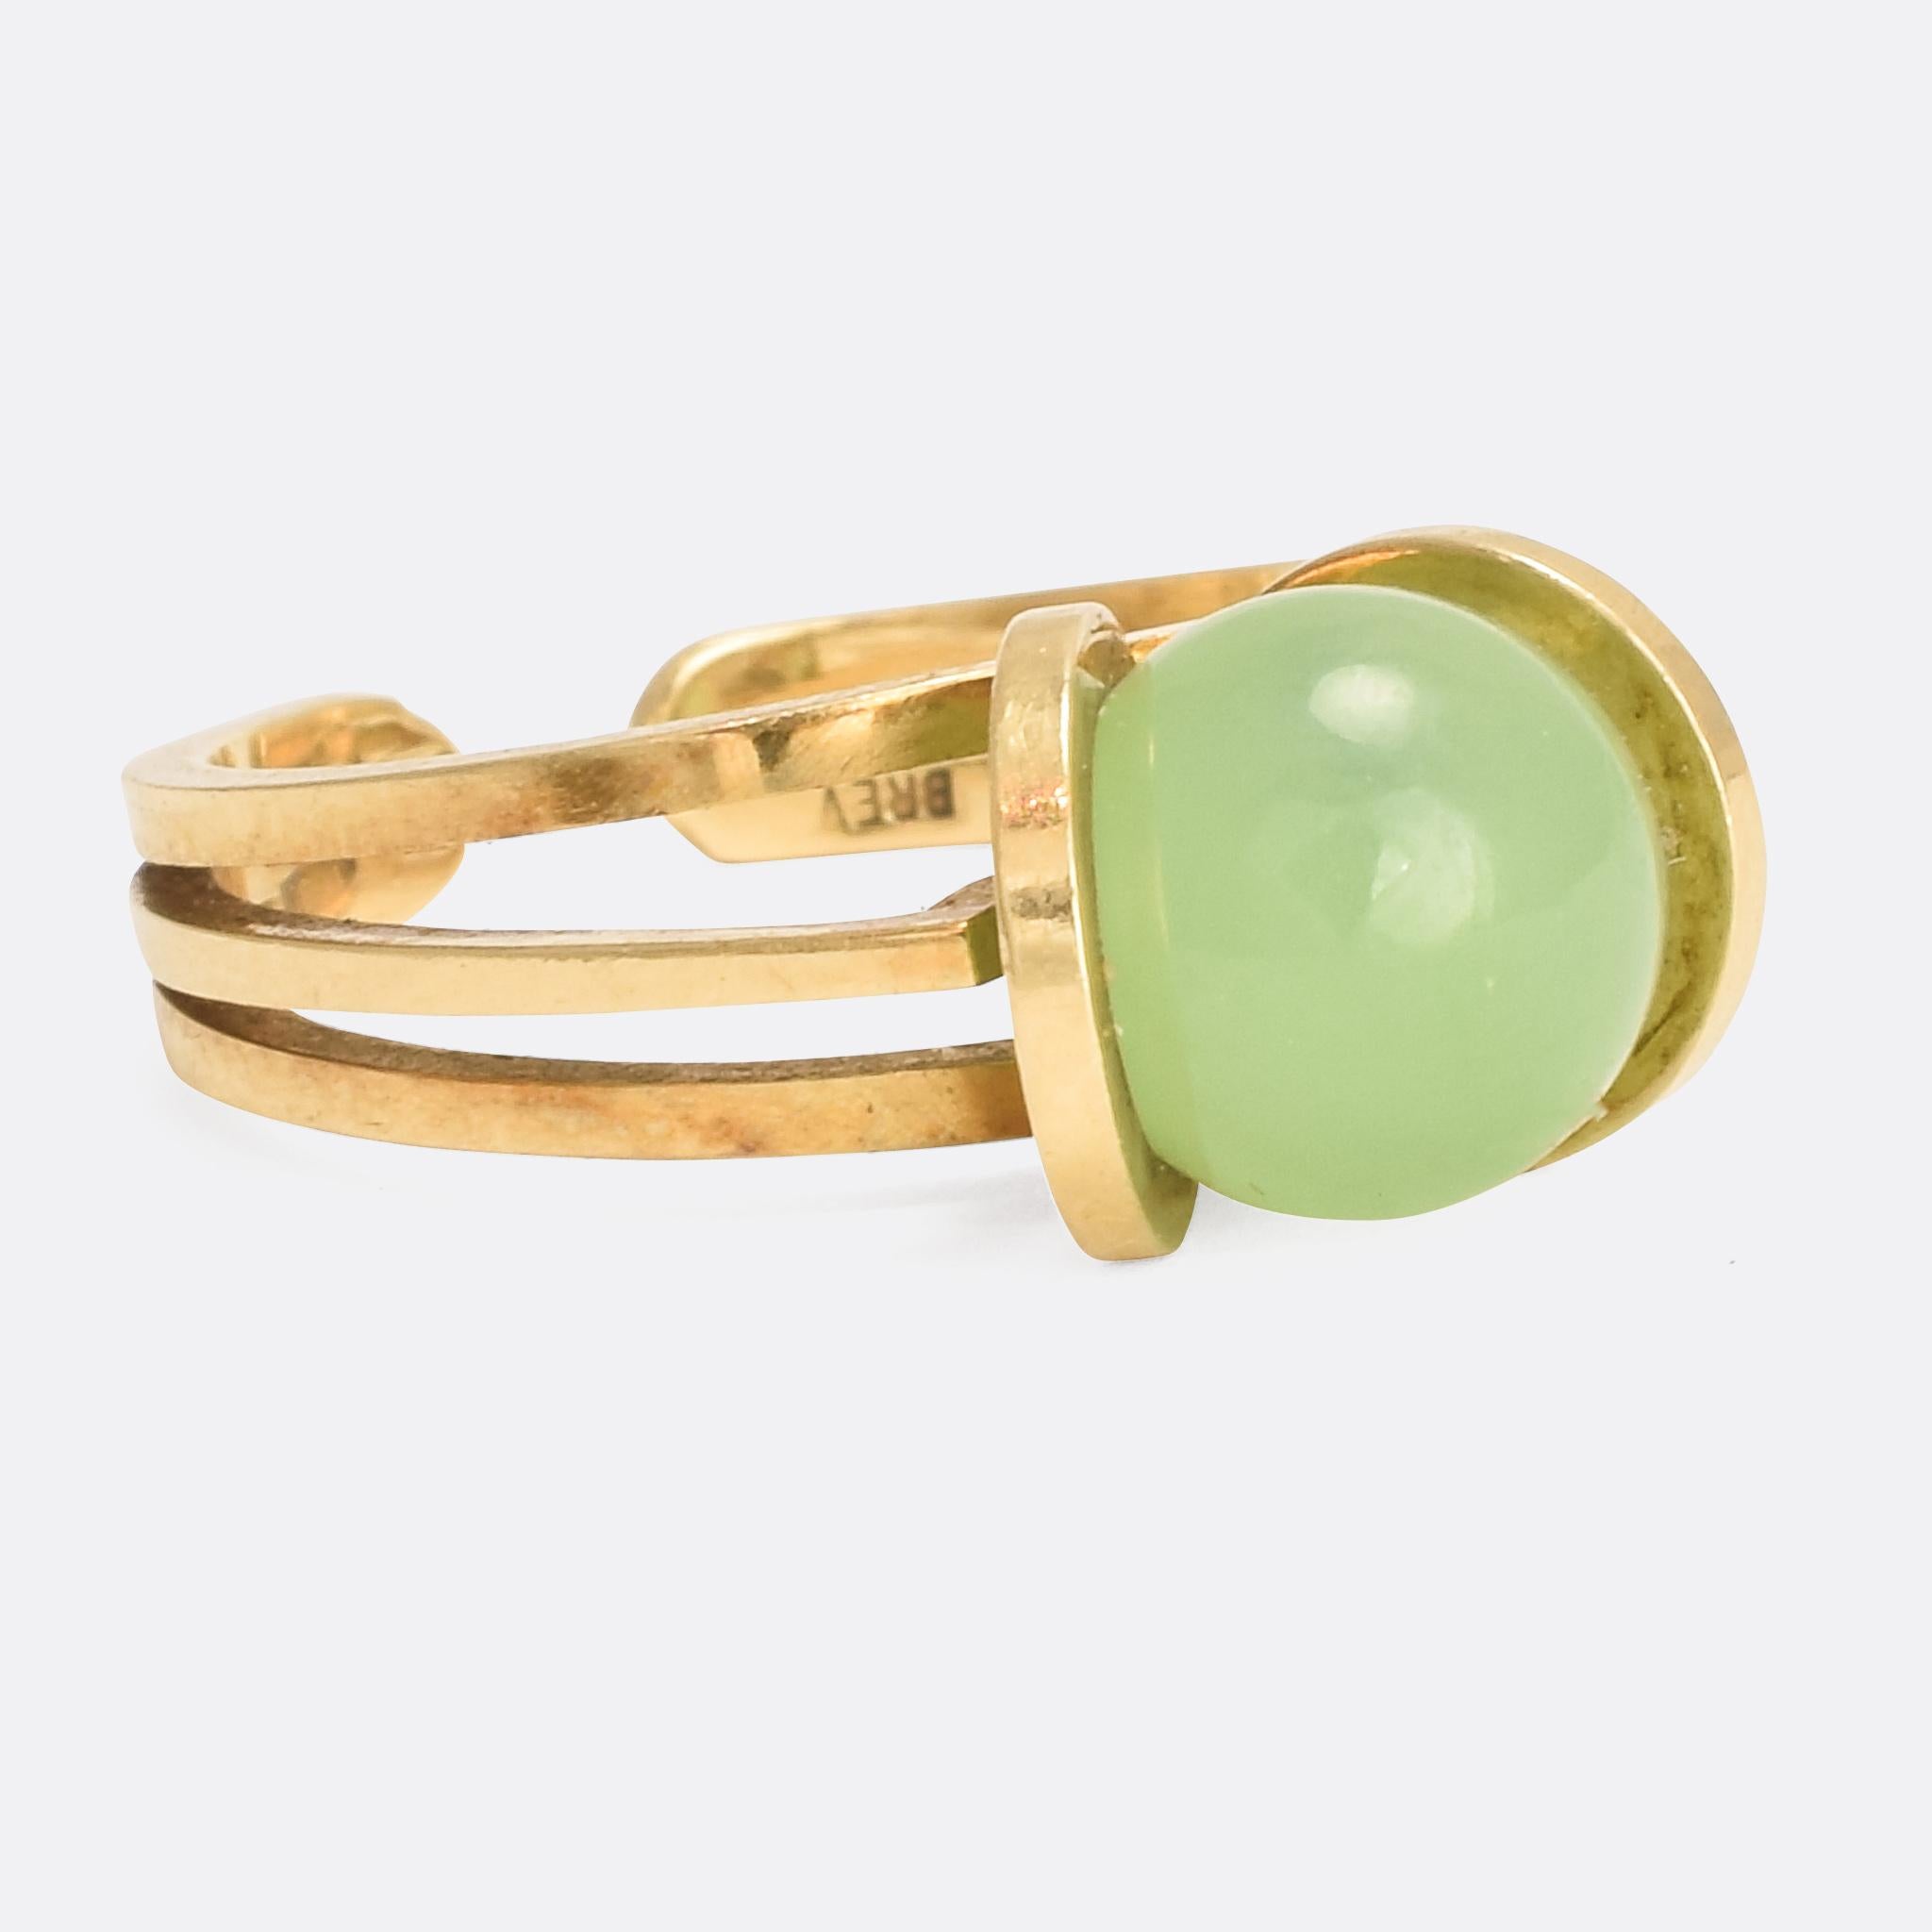 A wonderful vintage ring with eight interchangable semi-precious stones. The ring mount is crafted in 18k gold with striking 1970s styling, and the eight stones are shaped into spheres that snap in and out of the two circles at the head. It's